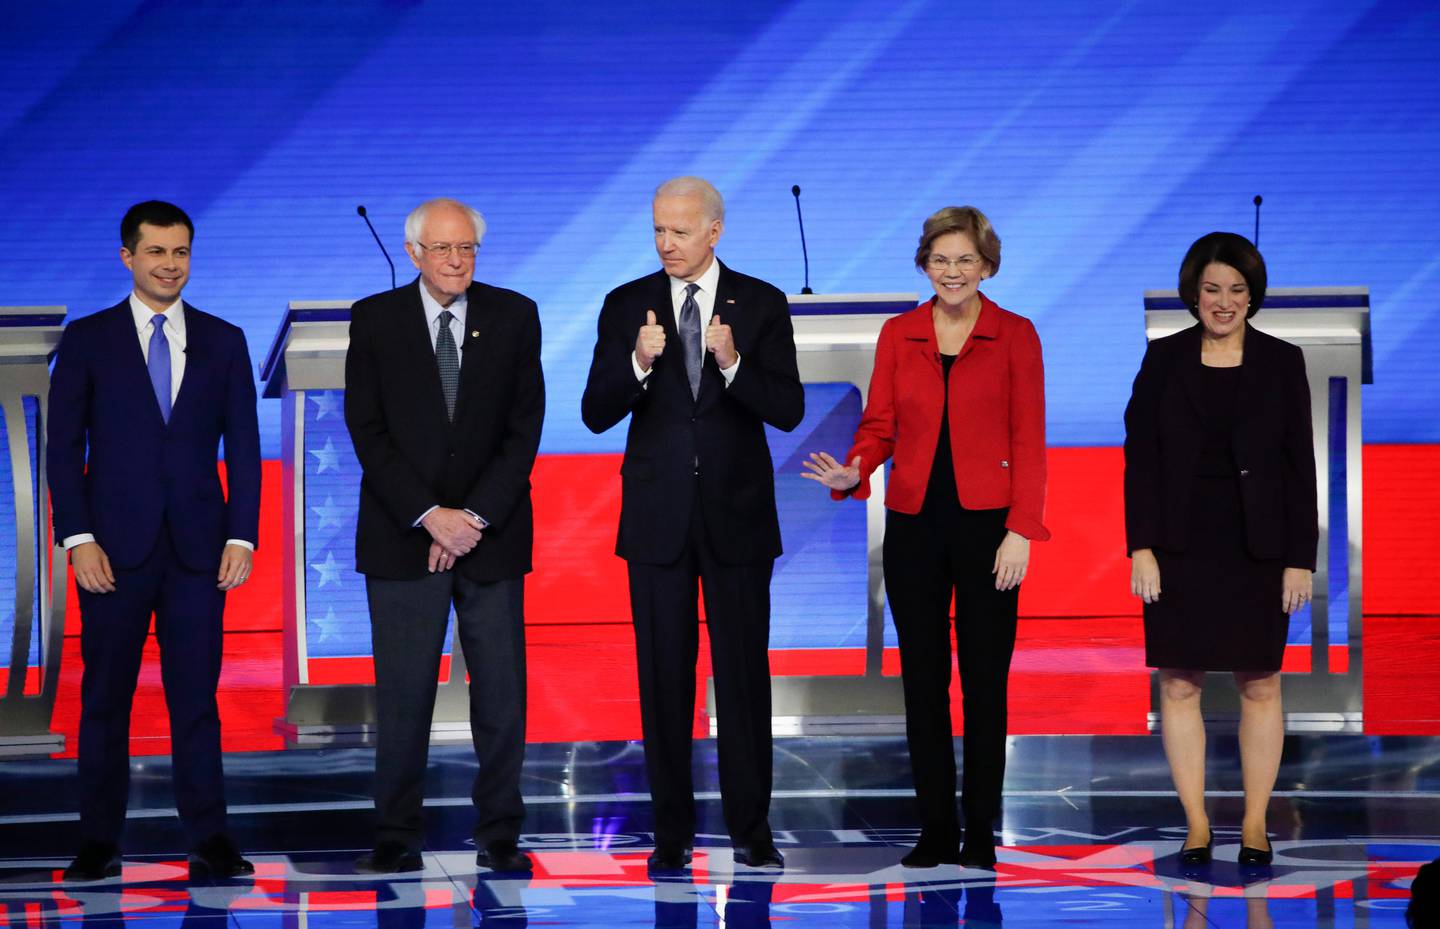 From left, Democratic presidential candidates former South Bend Mayor Pete Buttigieg, Sen. Bernie Sanders, I-Vt., former Vice President Joe Biden, Sen. Elizabeth Warren, D-Mass., and Sen. Amy Klobuchar, D-Minn., stand on stage Friday, Feb. 7, 2020, before the start of a Democratic presidential primary debate hosted by ABC News, Apple News, and WMUR-TV at Saint Anselm College in Manchester, N.H. (AP Photo/Elise Amendola)